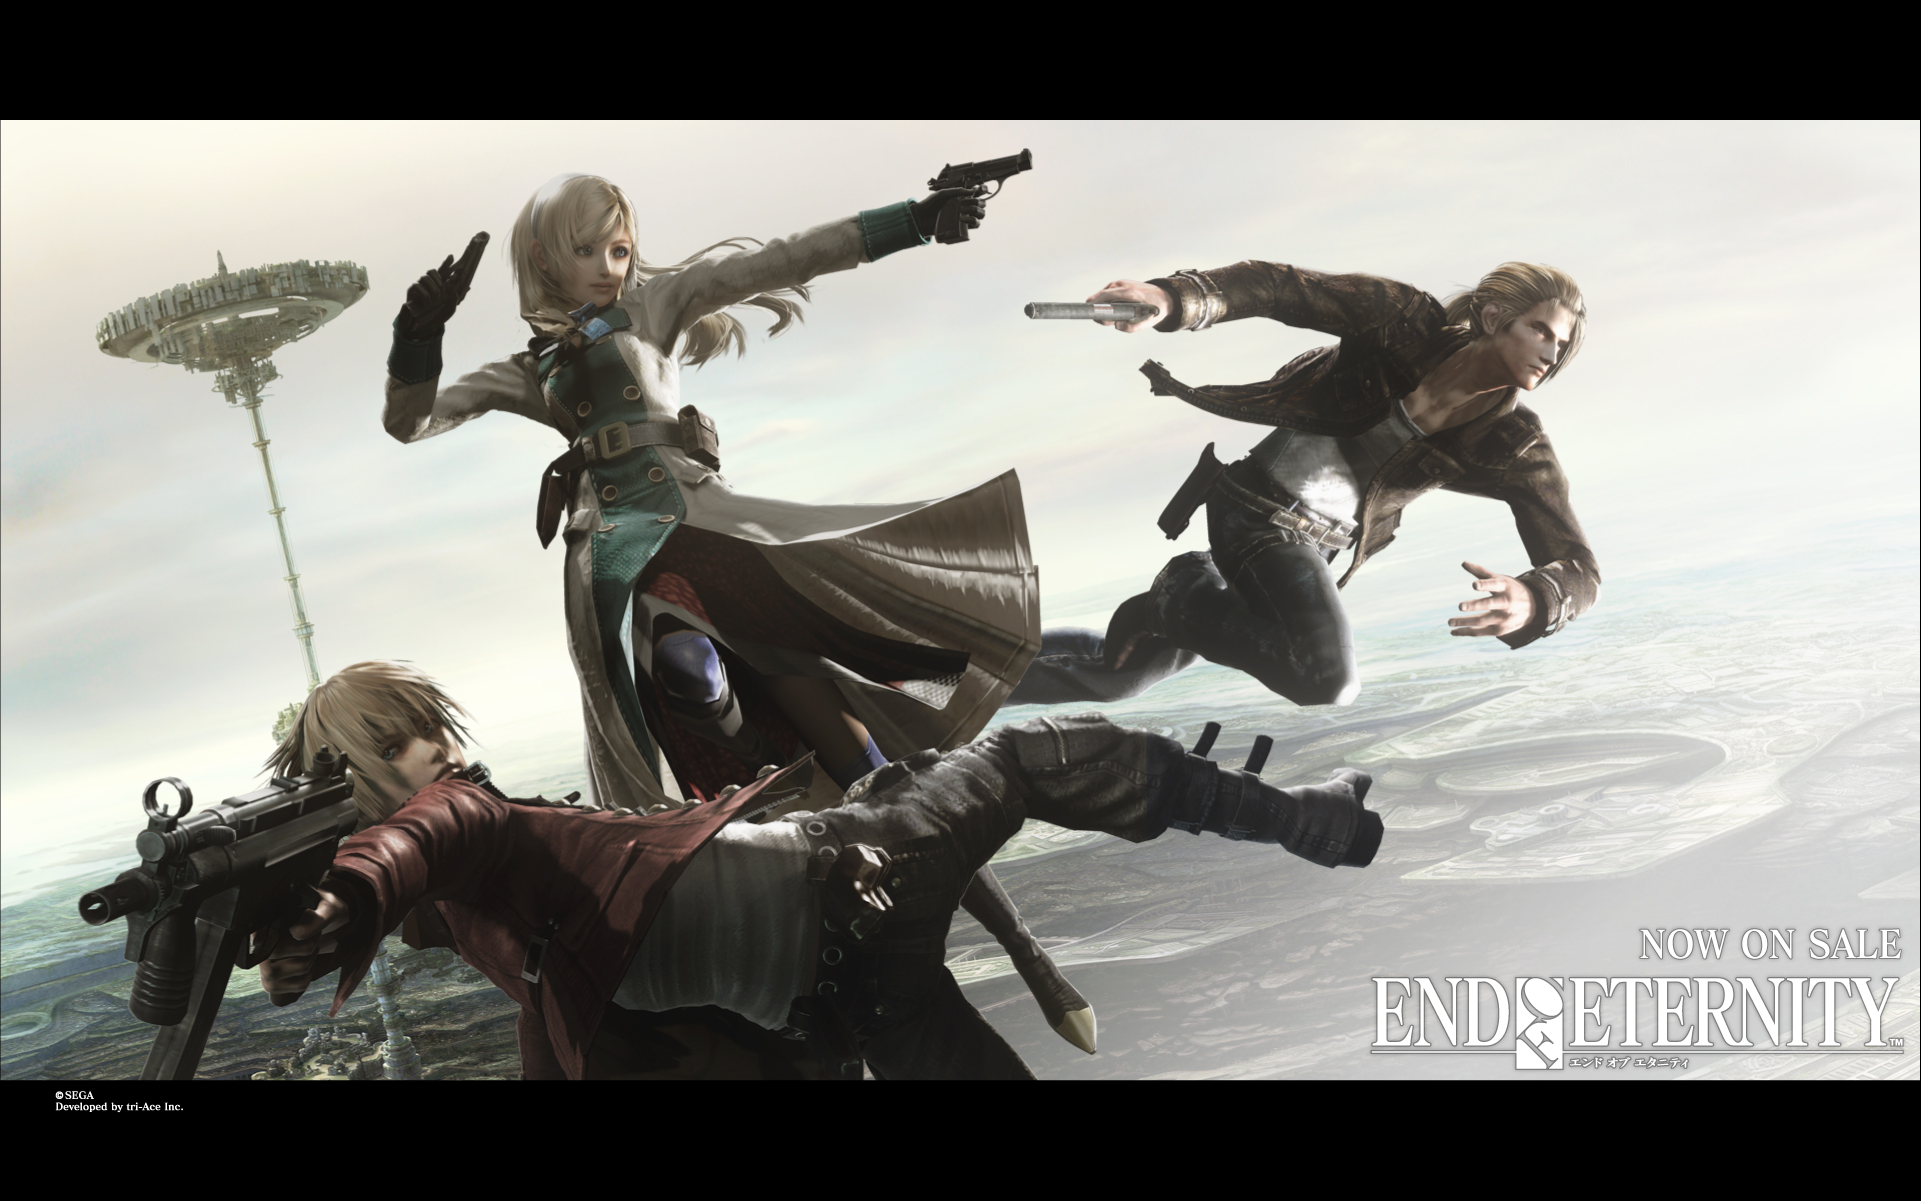 Resonance Of Fate Backgrounds, Compatible - PC, Mobile, Gadgets| 1921x1201 px